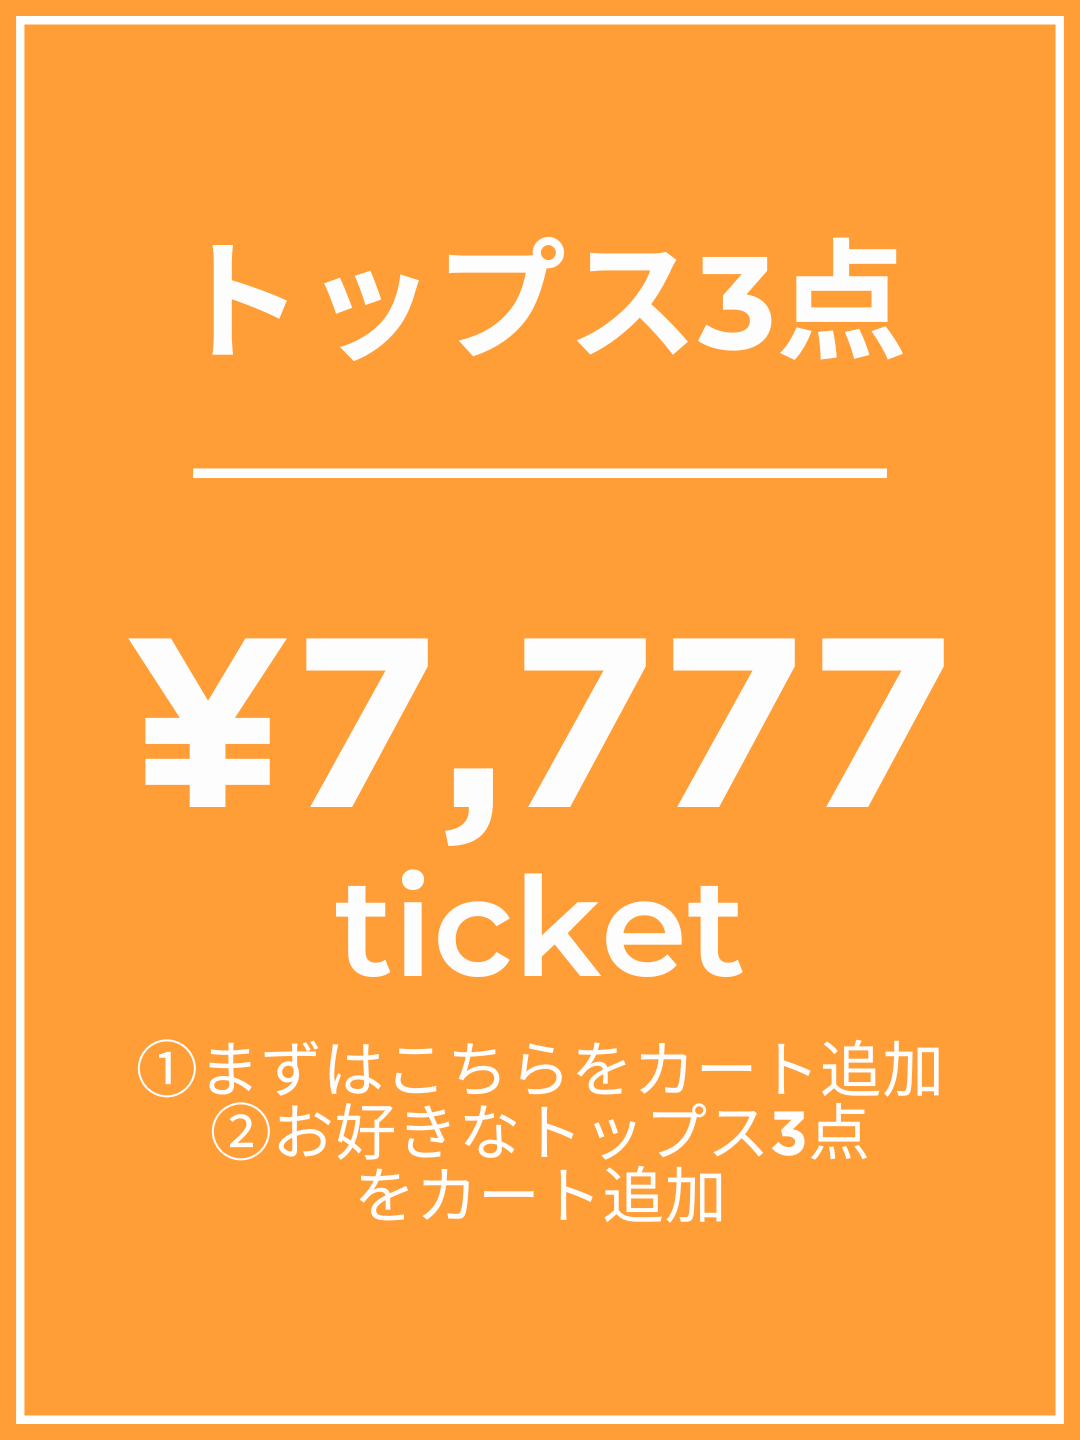 [Add this to your cart first] ¥7,777 ticket